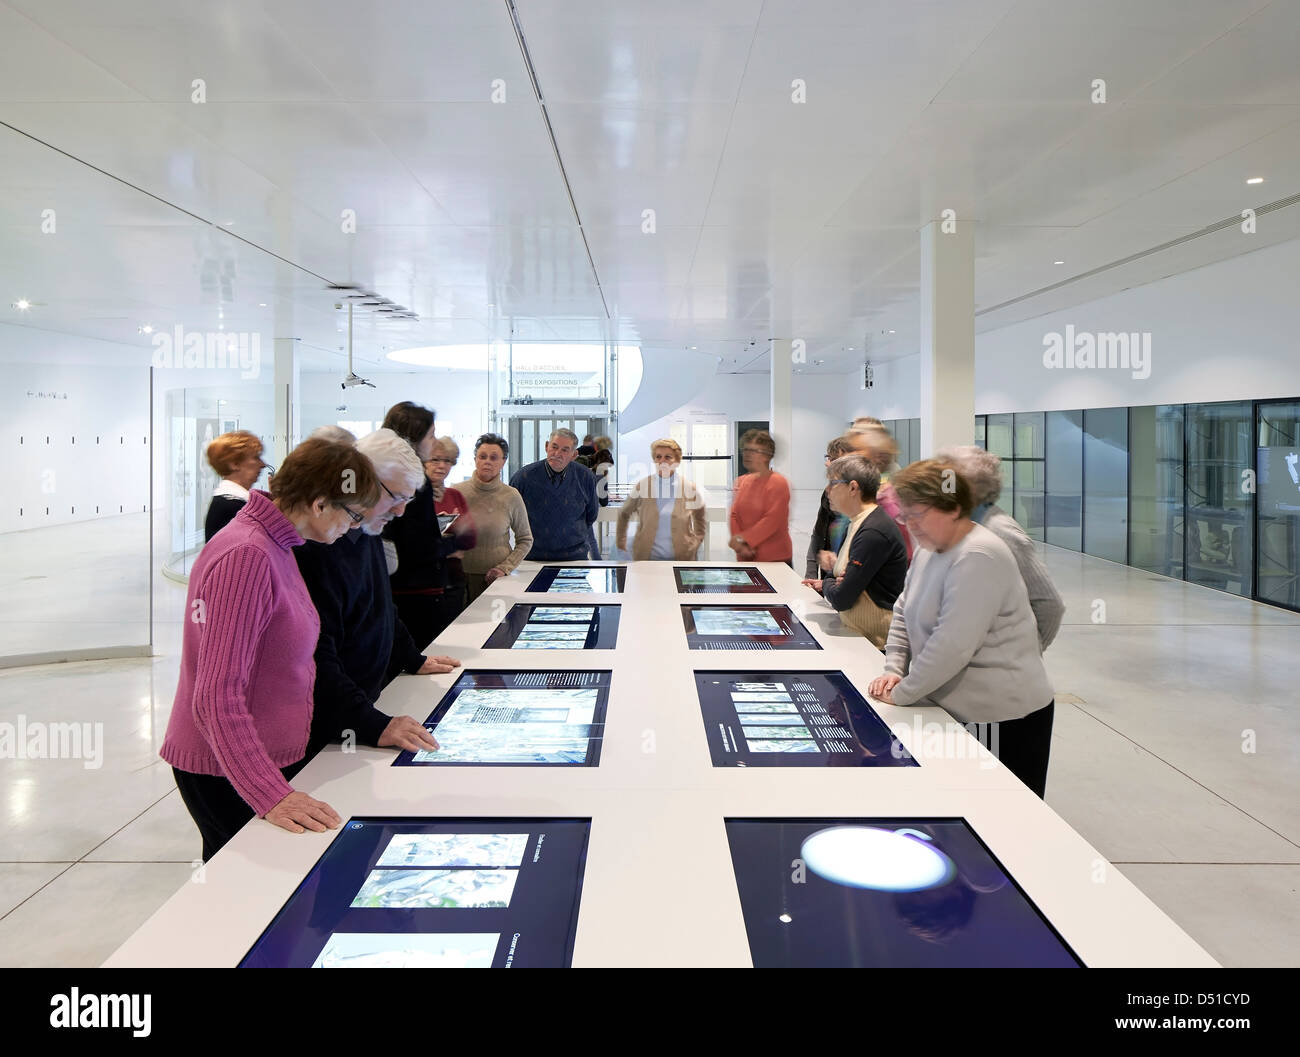 Musée Du Louvre  Lens, Lens, France. Architect: SANAA, 2012. Visitors and interactive display panels. Stock Photo